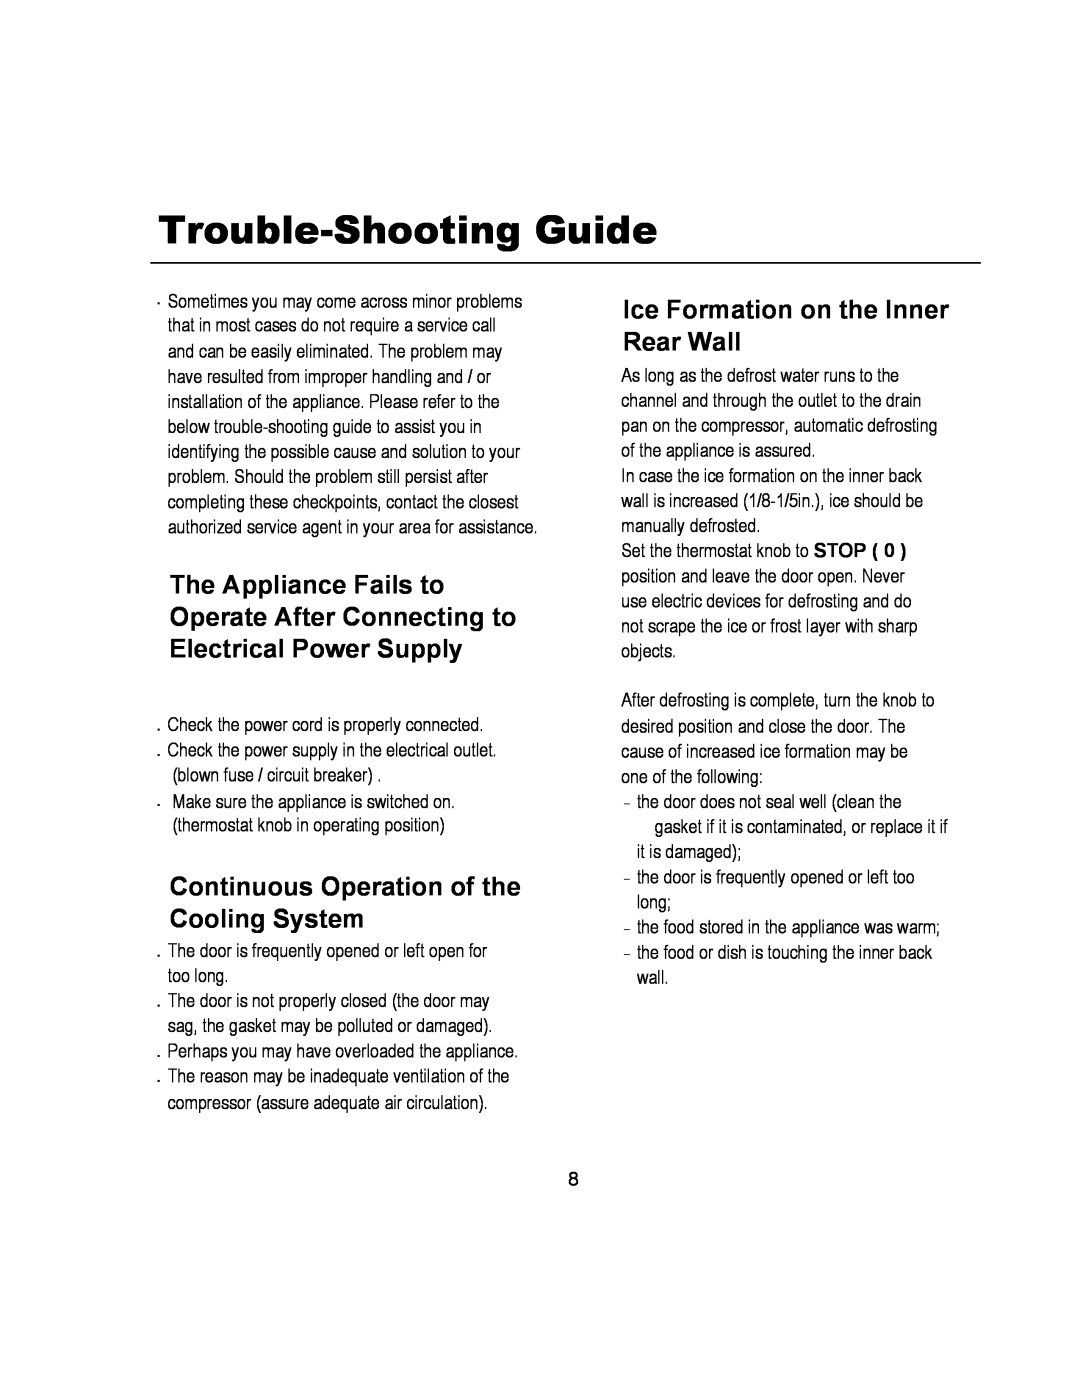 Magic Chef MCWC30MCG, MCWC16MCG operating instructions Trouble-ShootingGuide, Continuous Operation of the Cooling System 